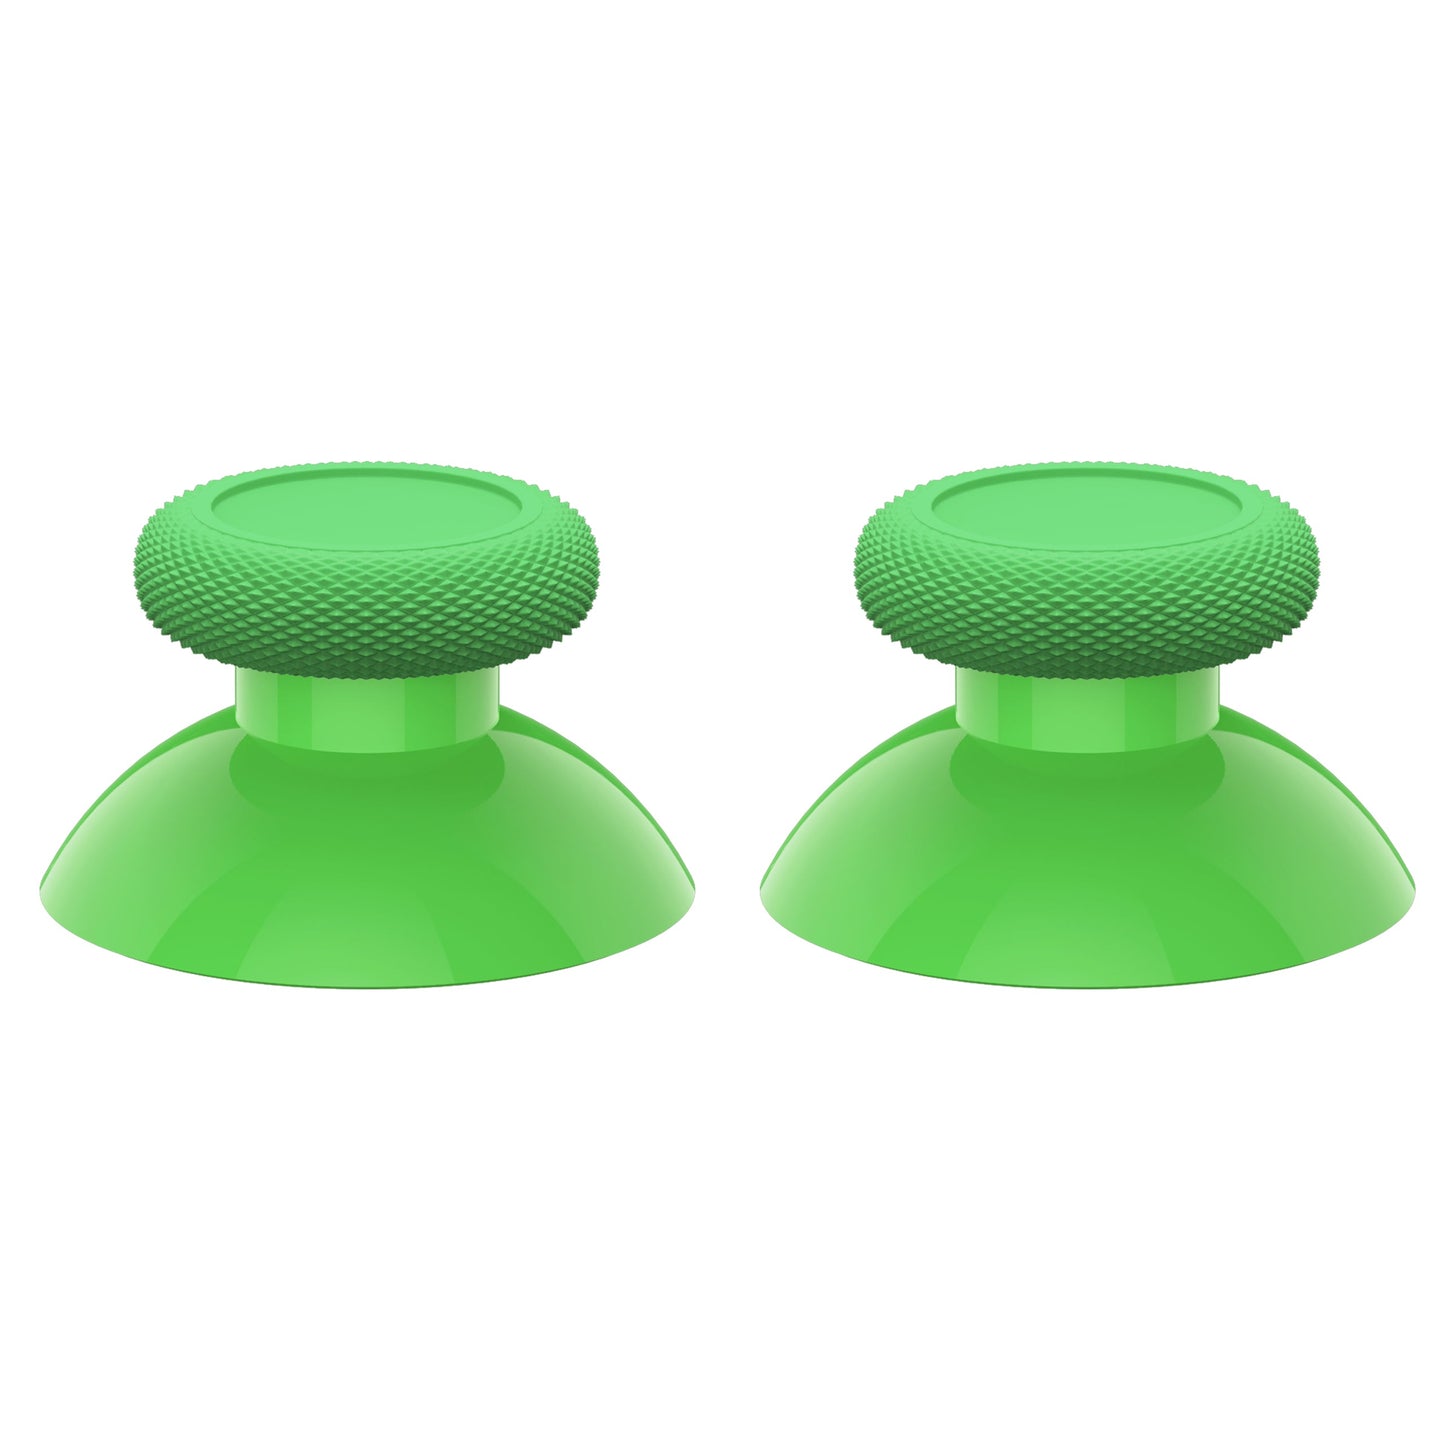 eXtremeRate Retail Green Replacement Thumbsticks for Xbox Series X/S Controller, for Xbox One Standard Controller Analog Stick, Custom Joystick for Xbox One X/S, for Xbox One Elite Controller - JX3403